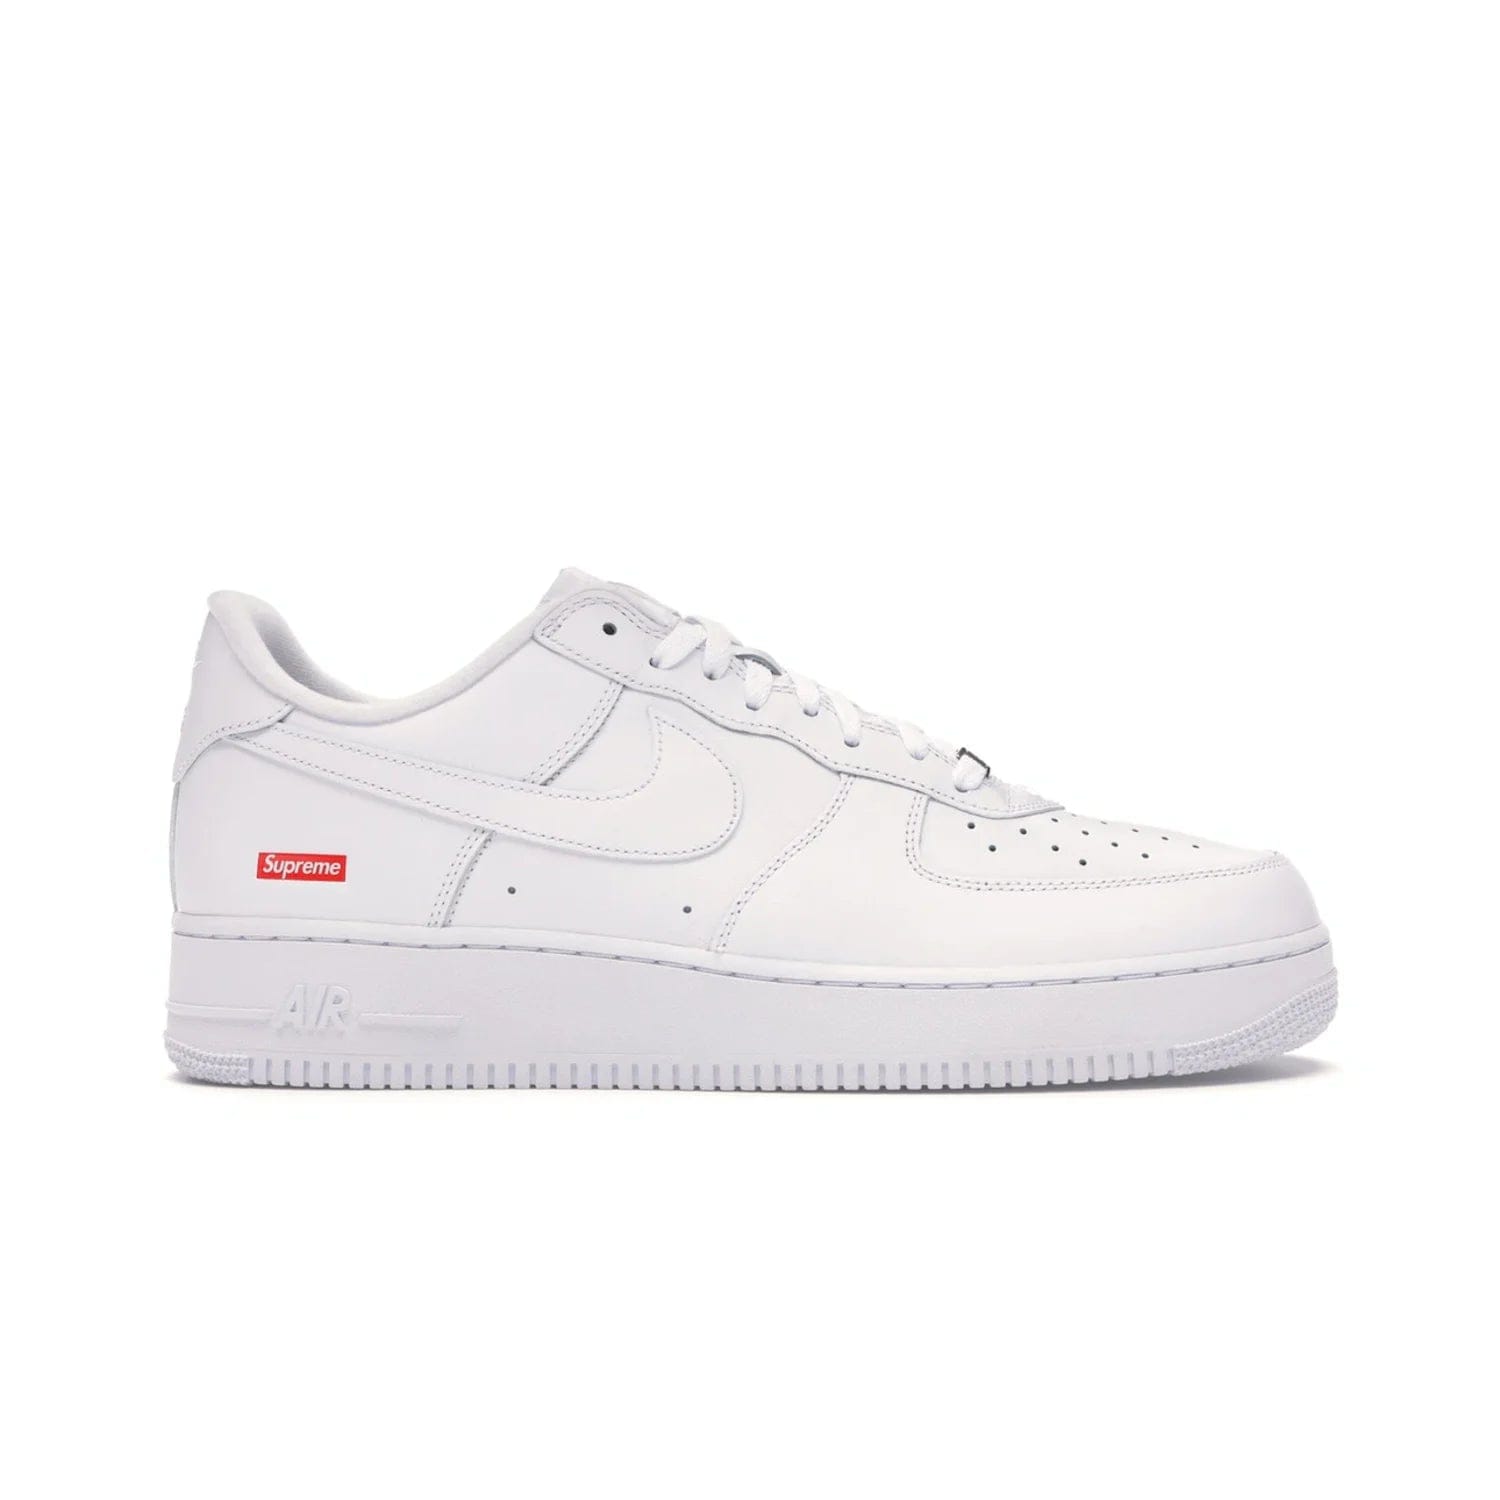 Nike Air Force 1 Low Supreme White - Image 1 - Only at www.BallersClubKickz.com - The Nike Air Force 1 Low Supreme White - a classic all-white design featuring premium leather and the iconic red Supreme Box Logo. Iconic sneakers embodying NYC style and culture. Released March 2020.